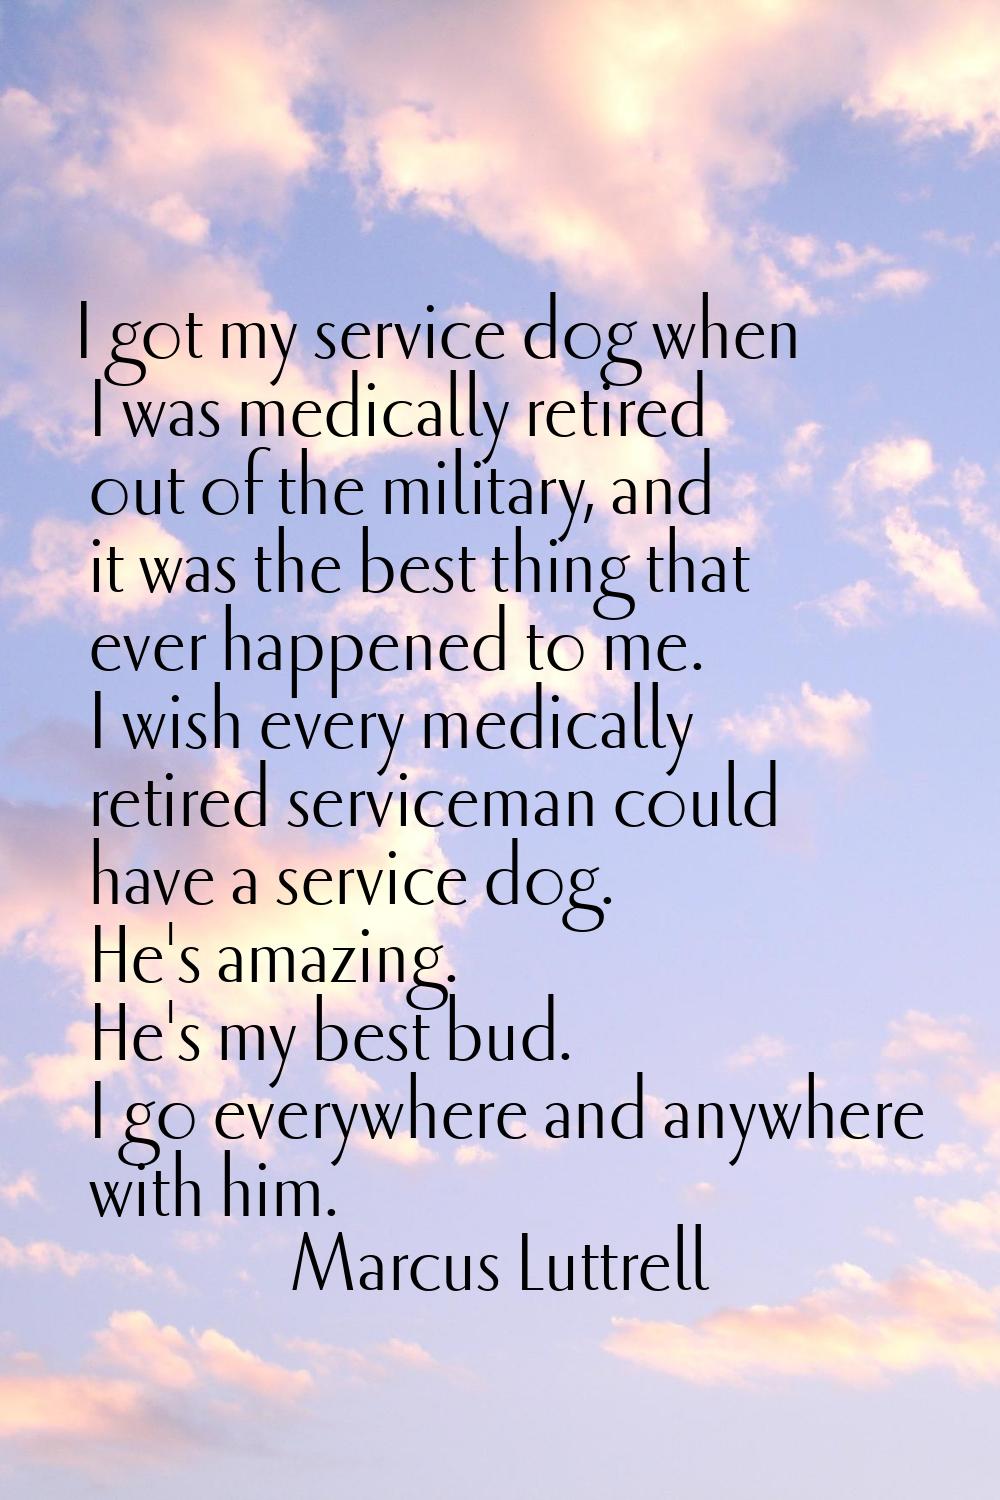 I got my service dog when I was medically retired out of the military, and it was the best thing th